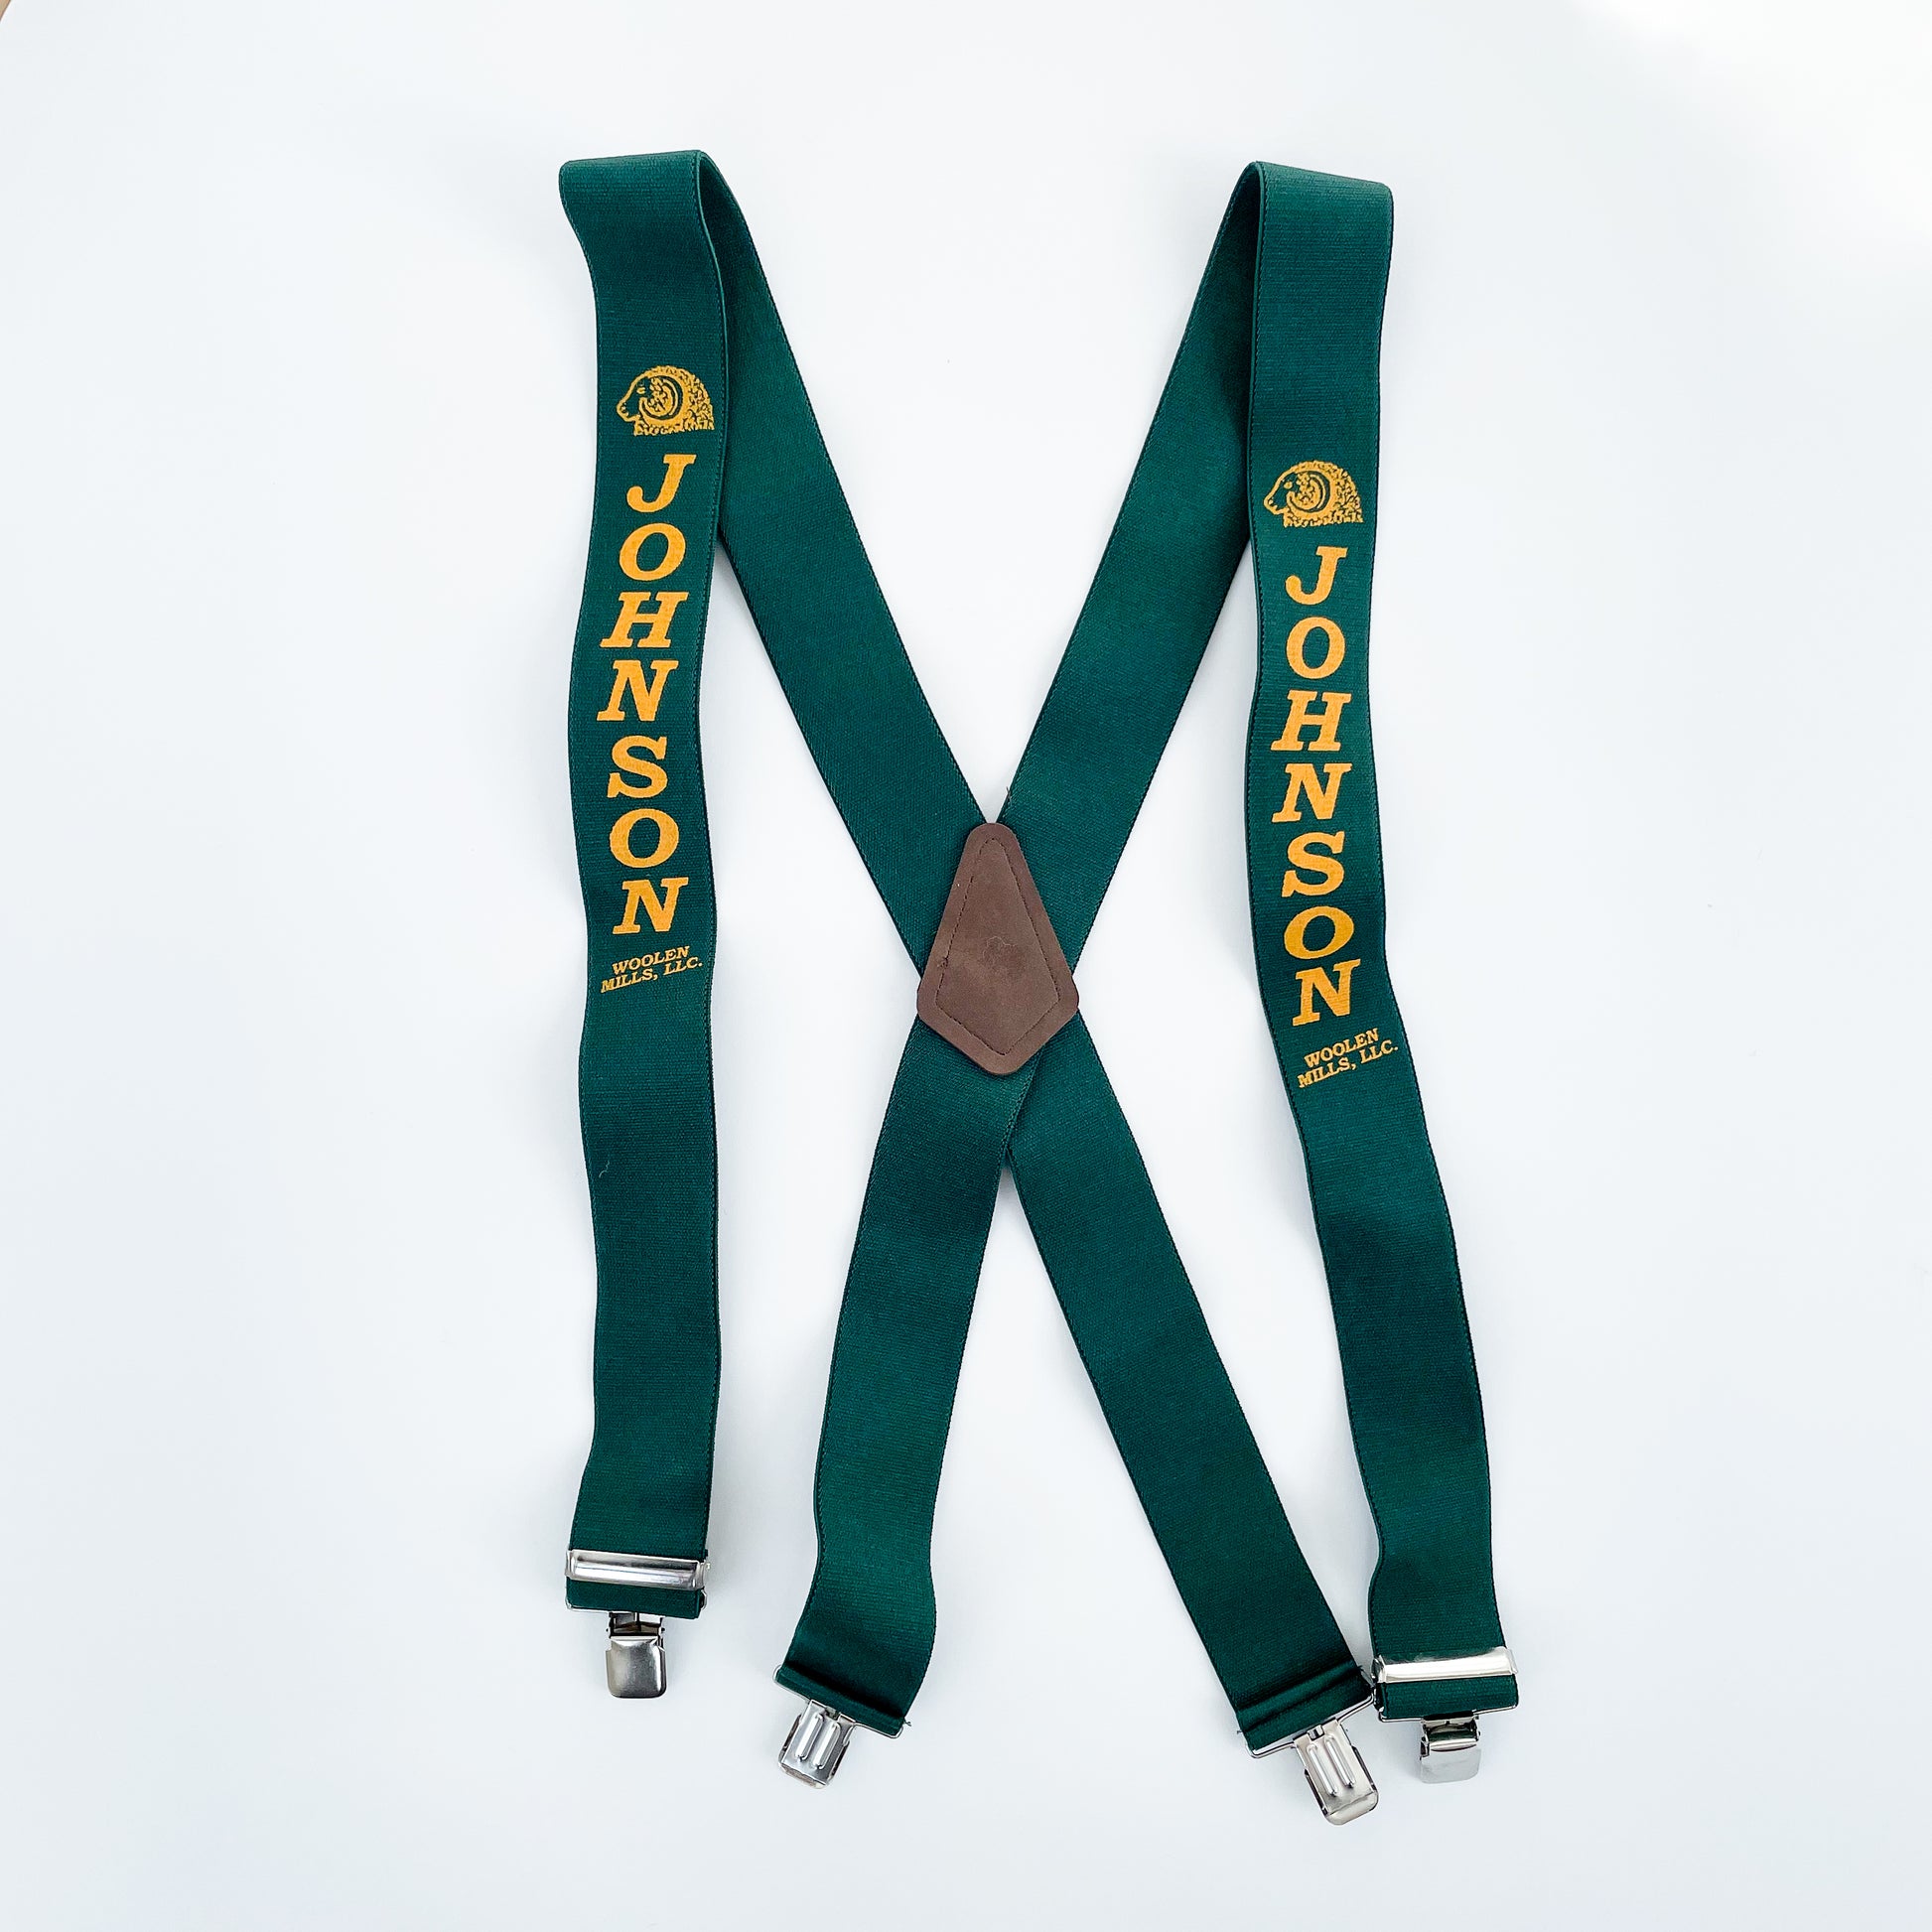 Johnson Woolen Mills green suspenders with metal clasps and gold JWM logo 